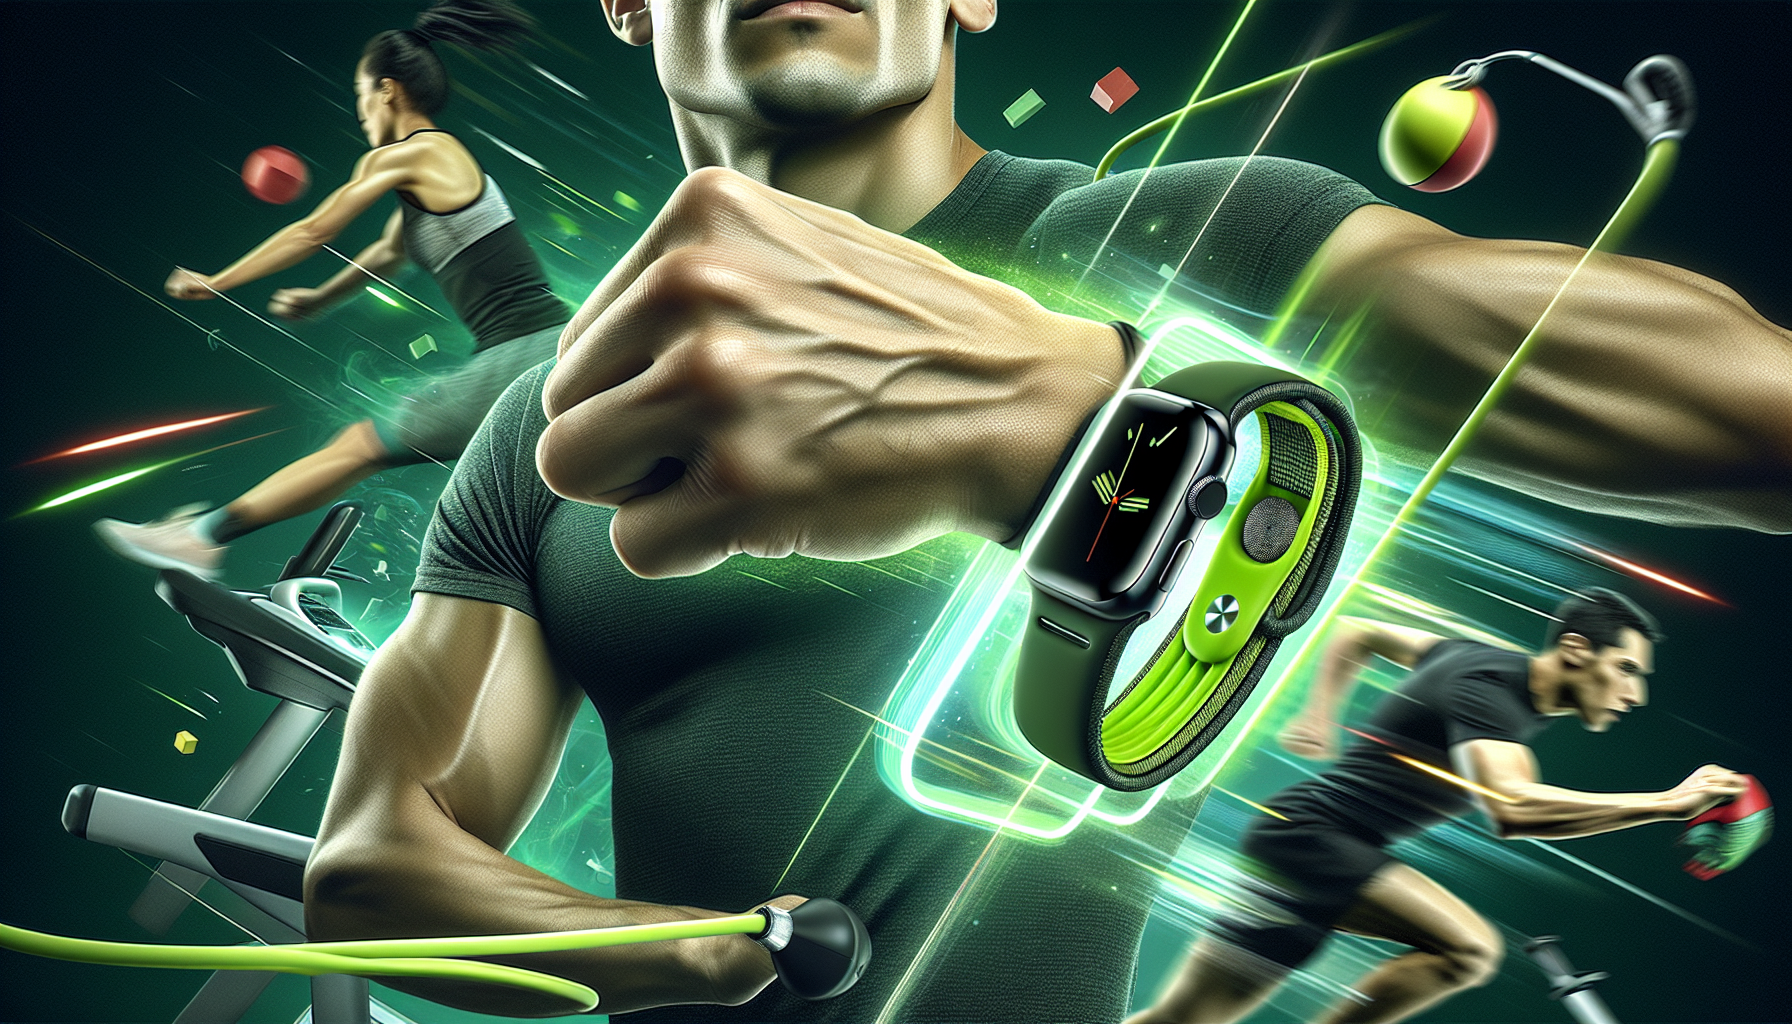 Apple Watch with a sport watch band in a fitness setting